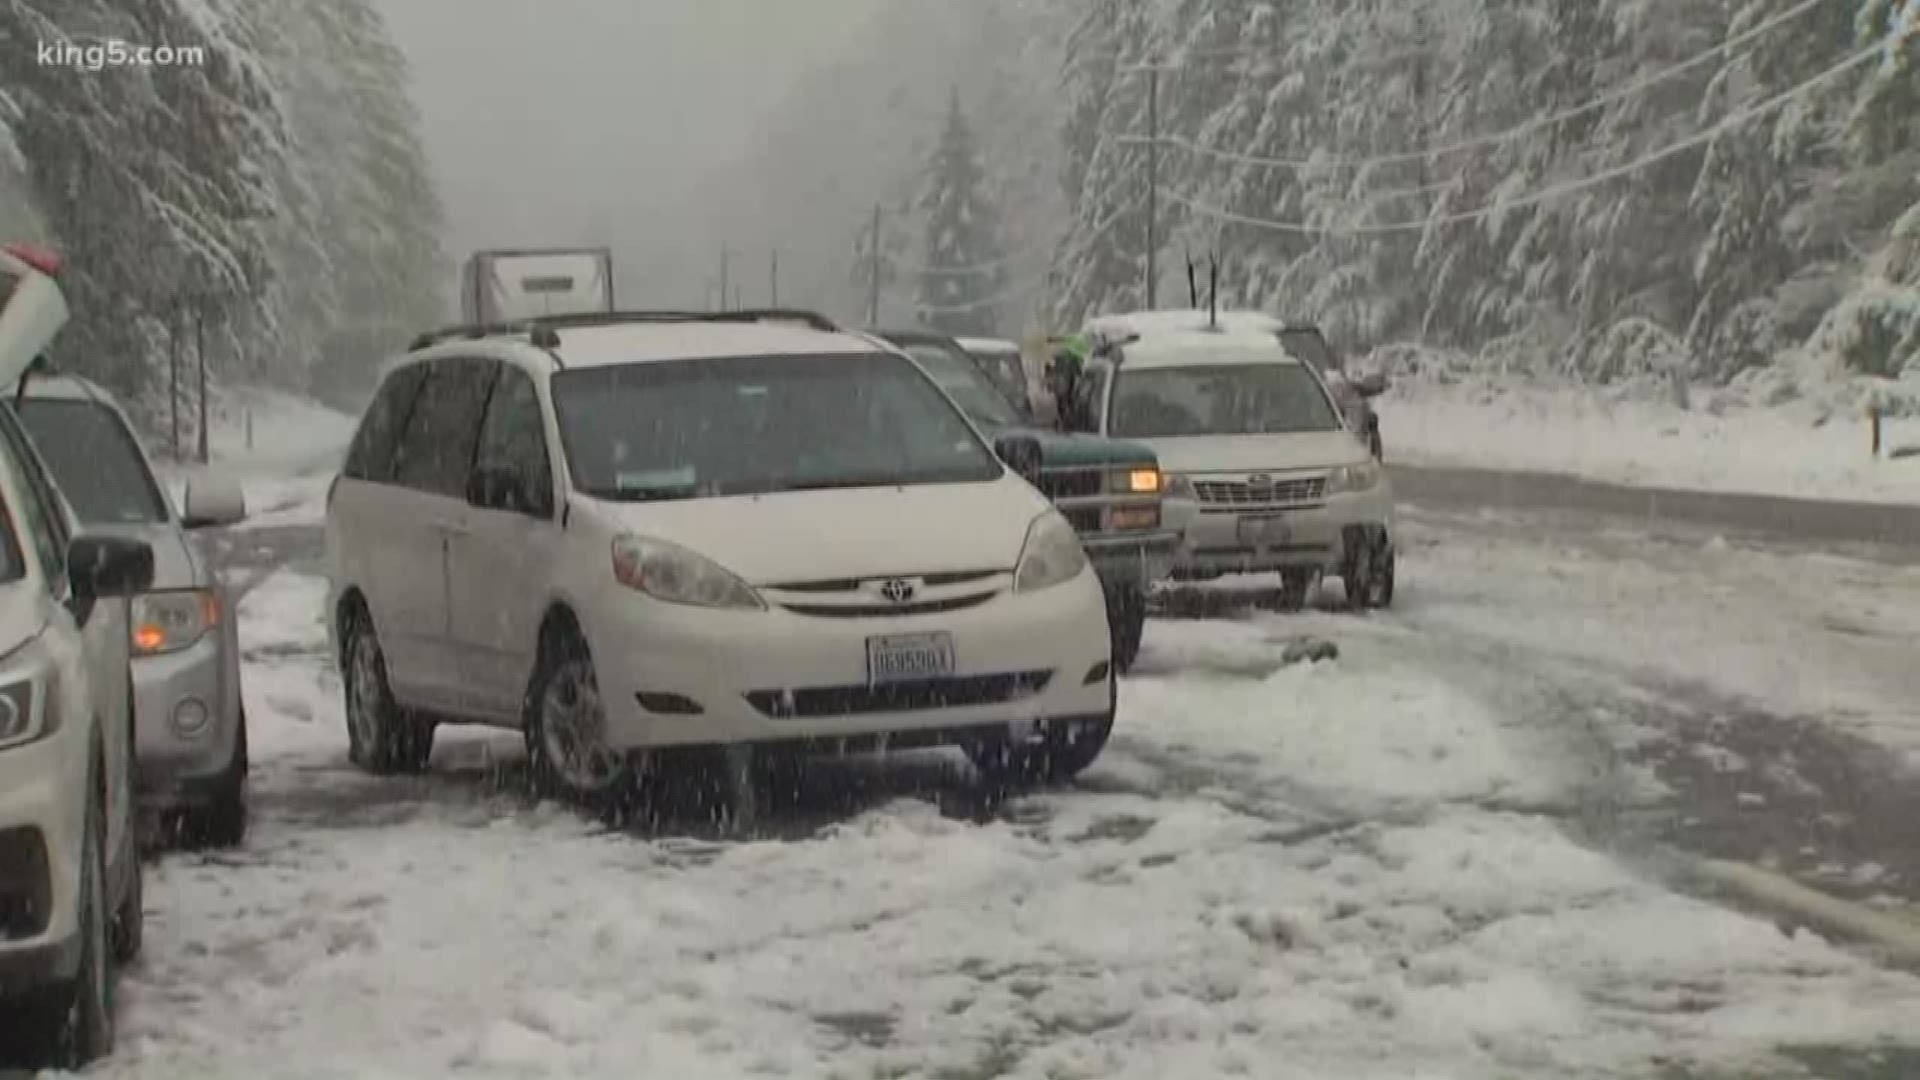 US Highway 2 over Stevens Pass closed in both directions Sunday night due to downed trees and power lines blocking the roadway.